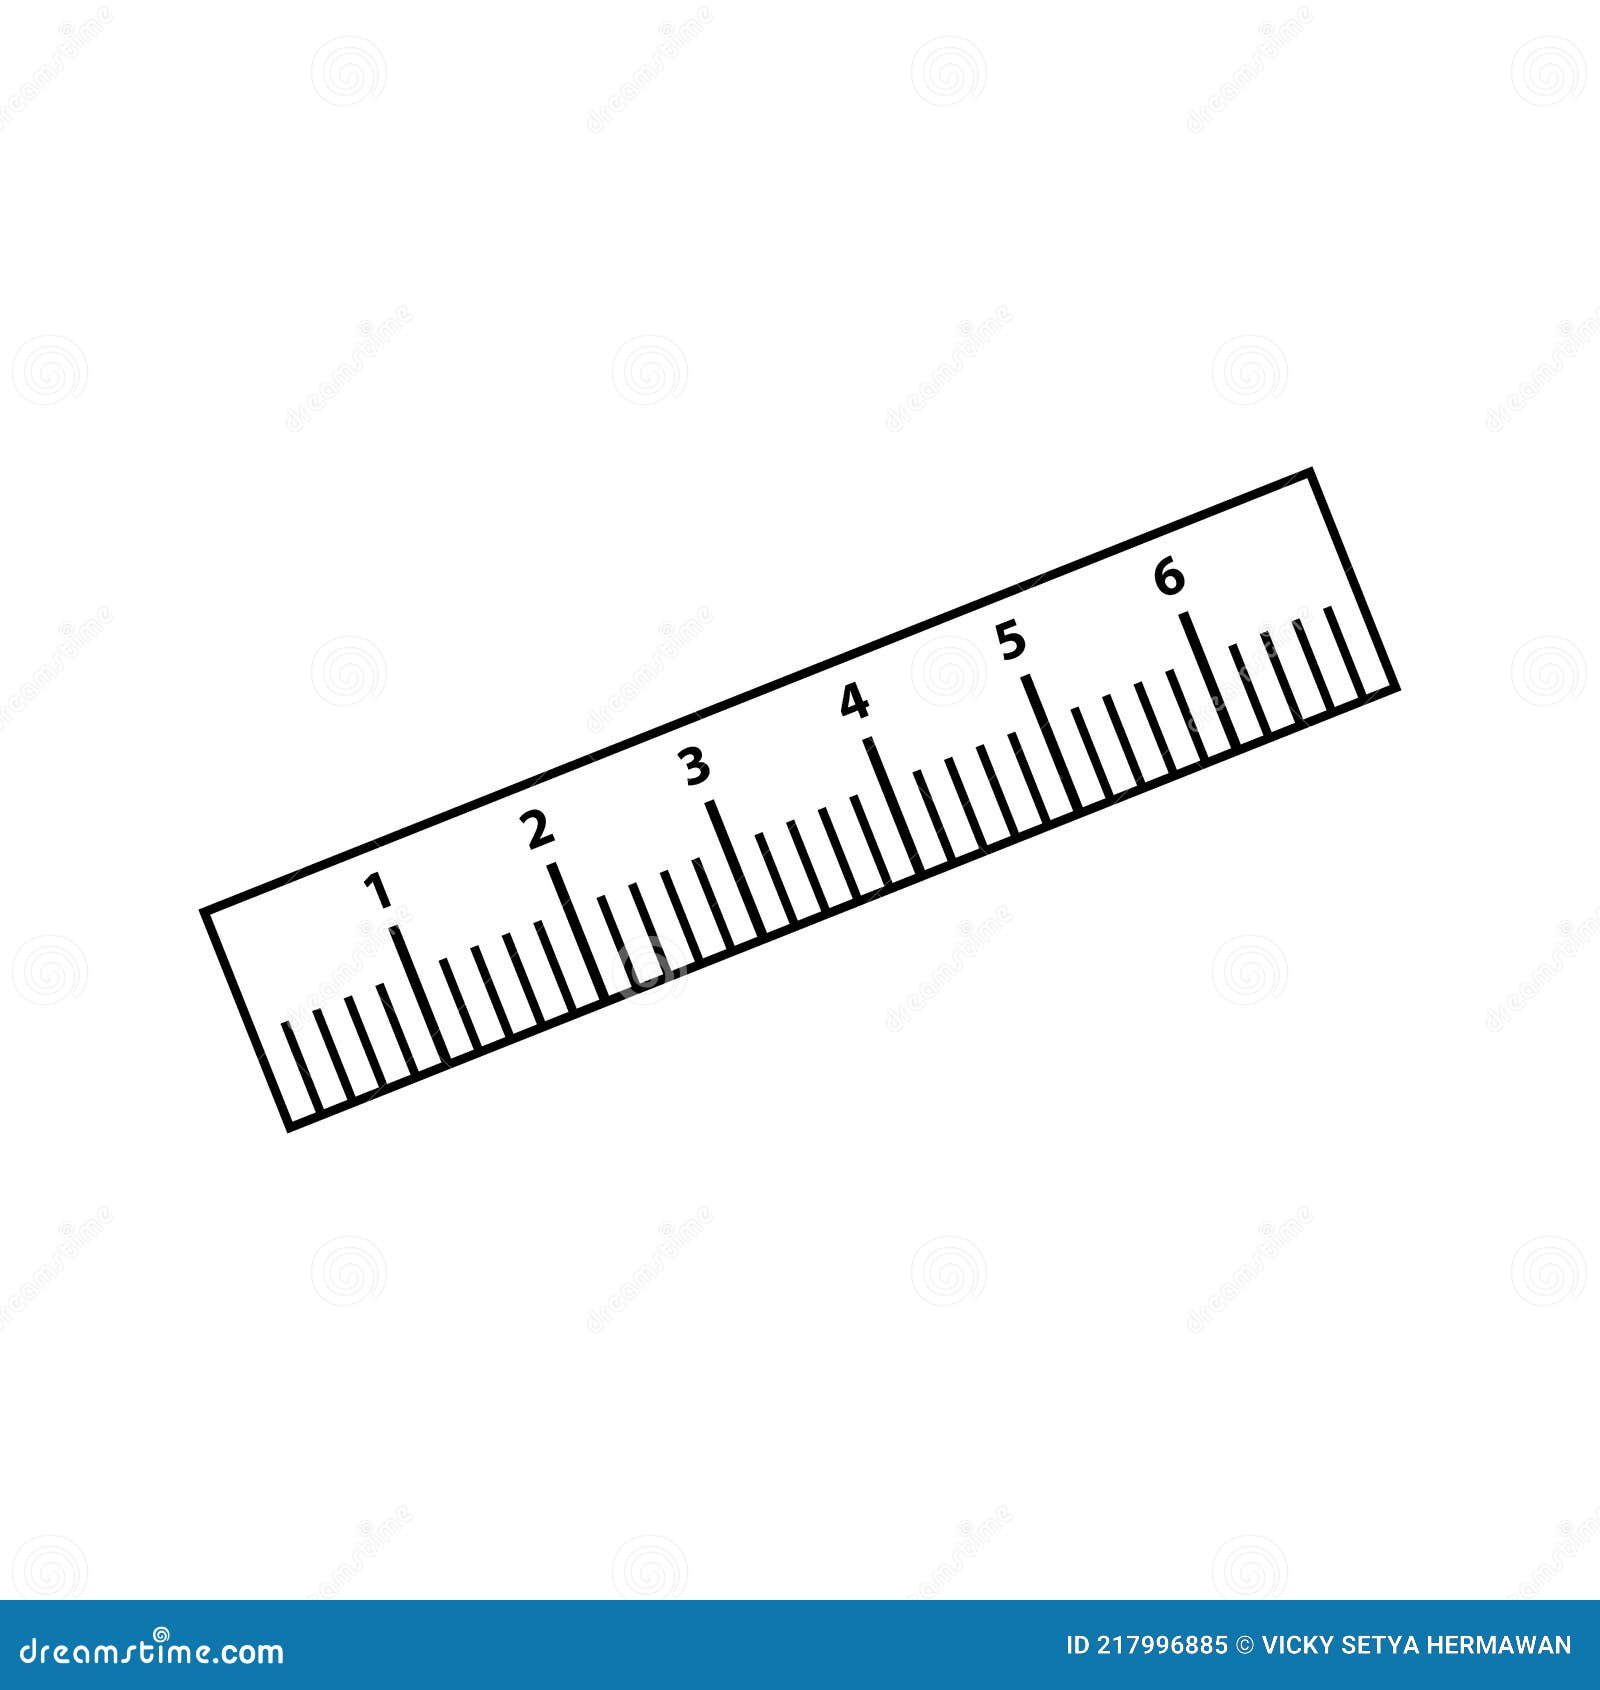 ruler icon